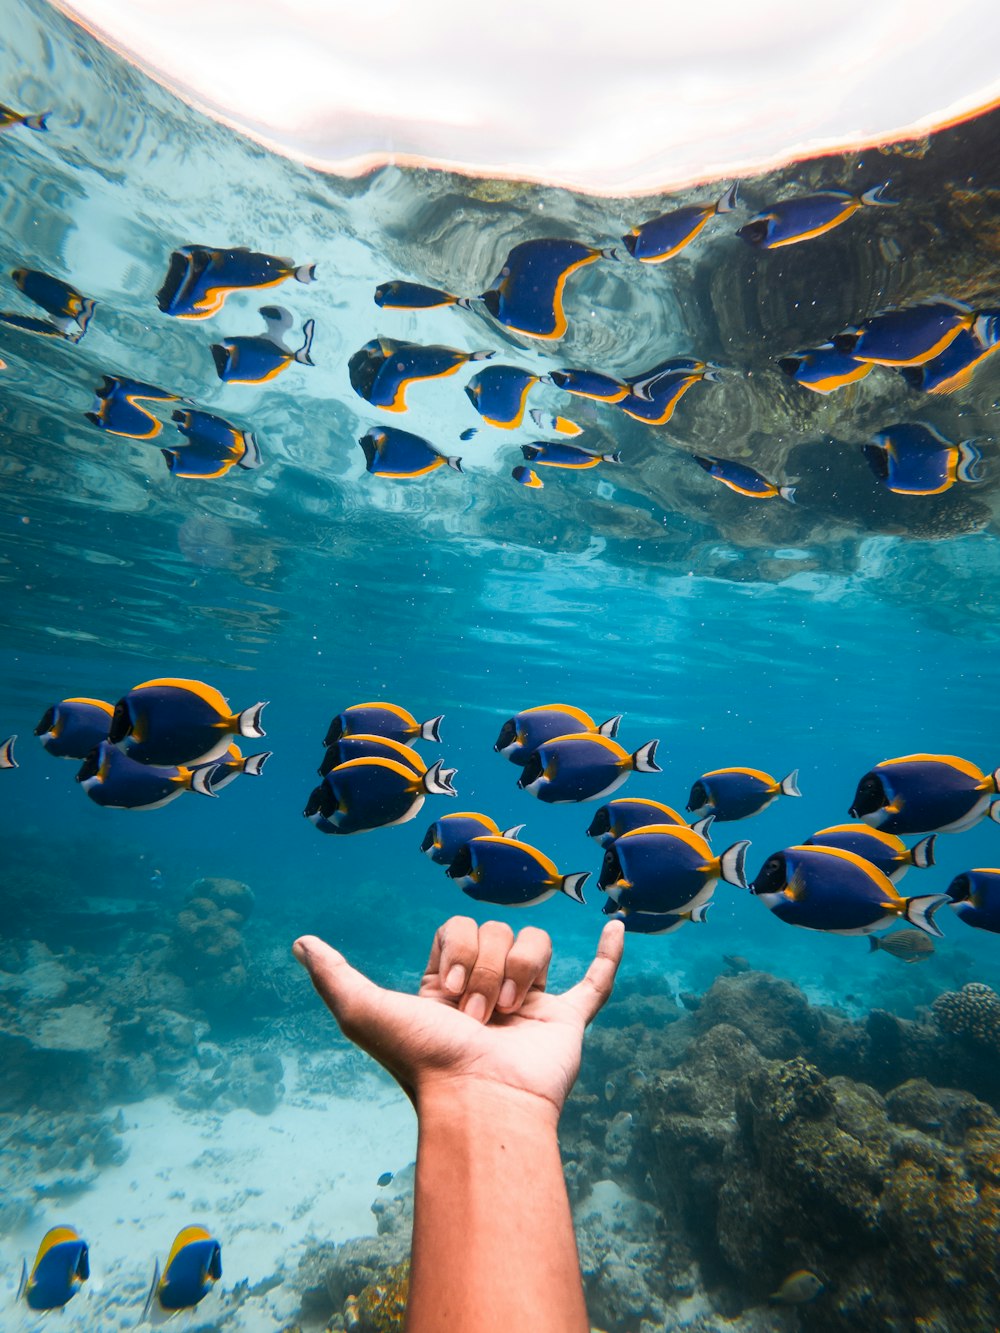 persons feet on water with school of fish